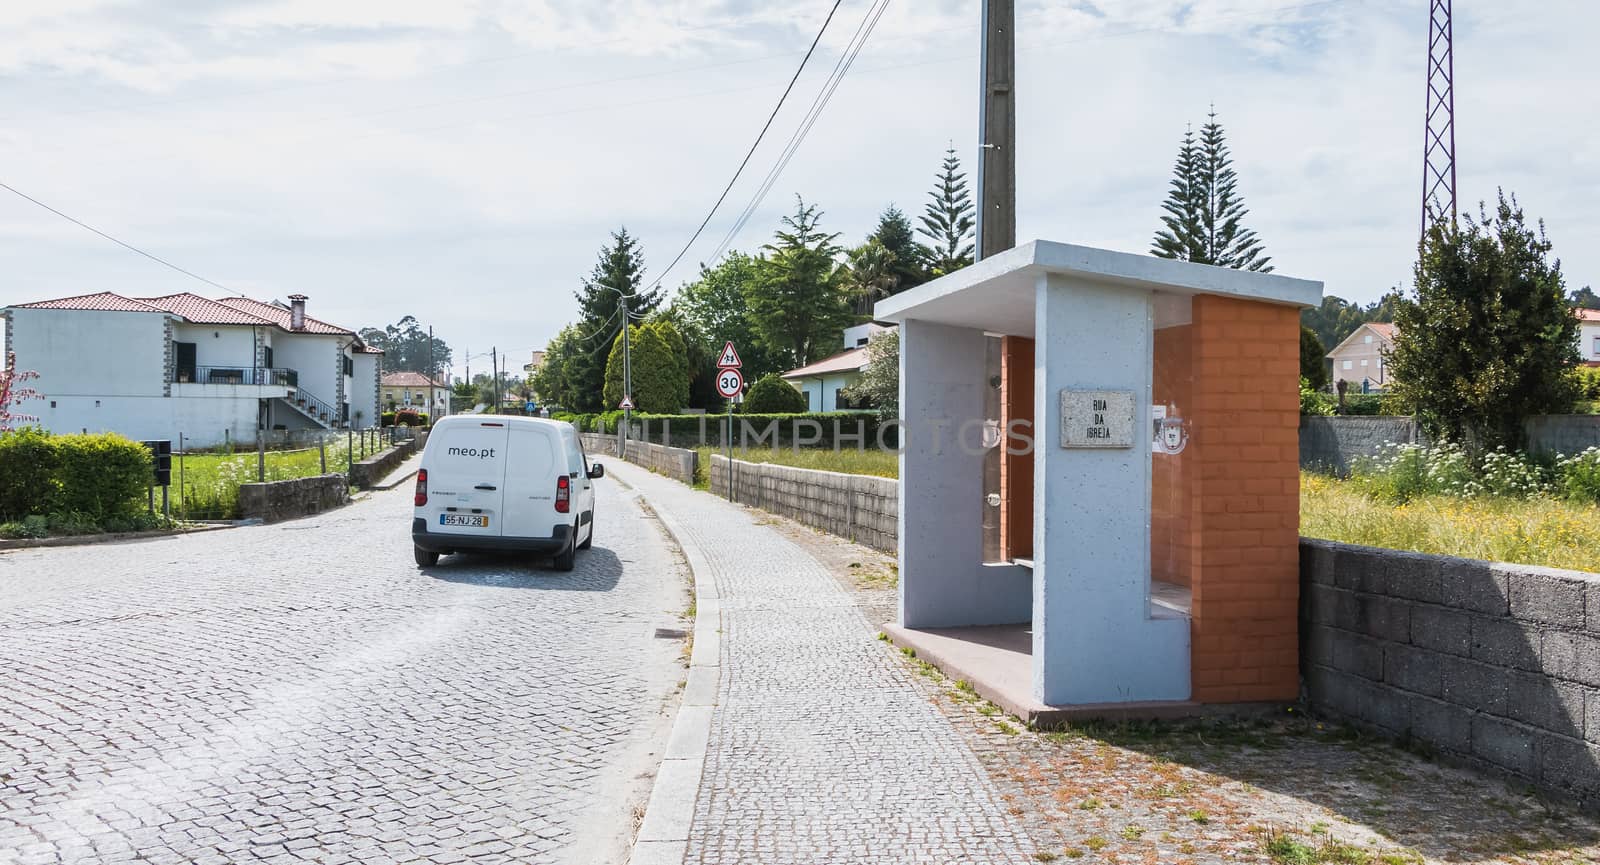 View of a bus stop in vila cha, portugal by AtlanticEUROSTOXX